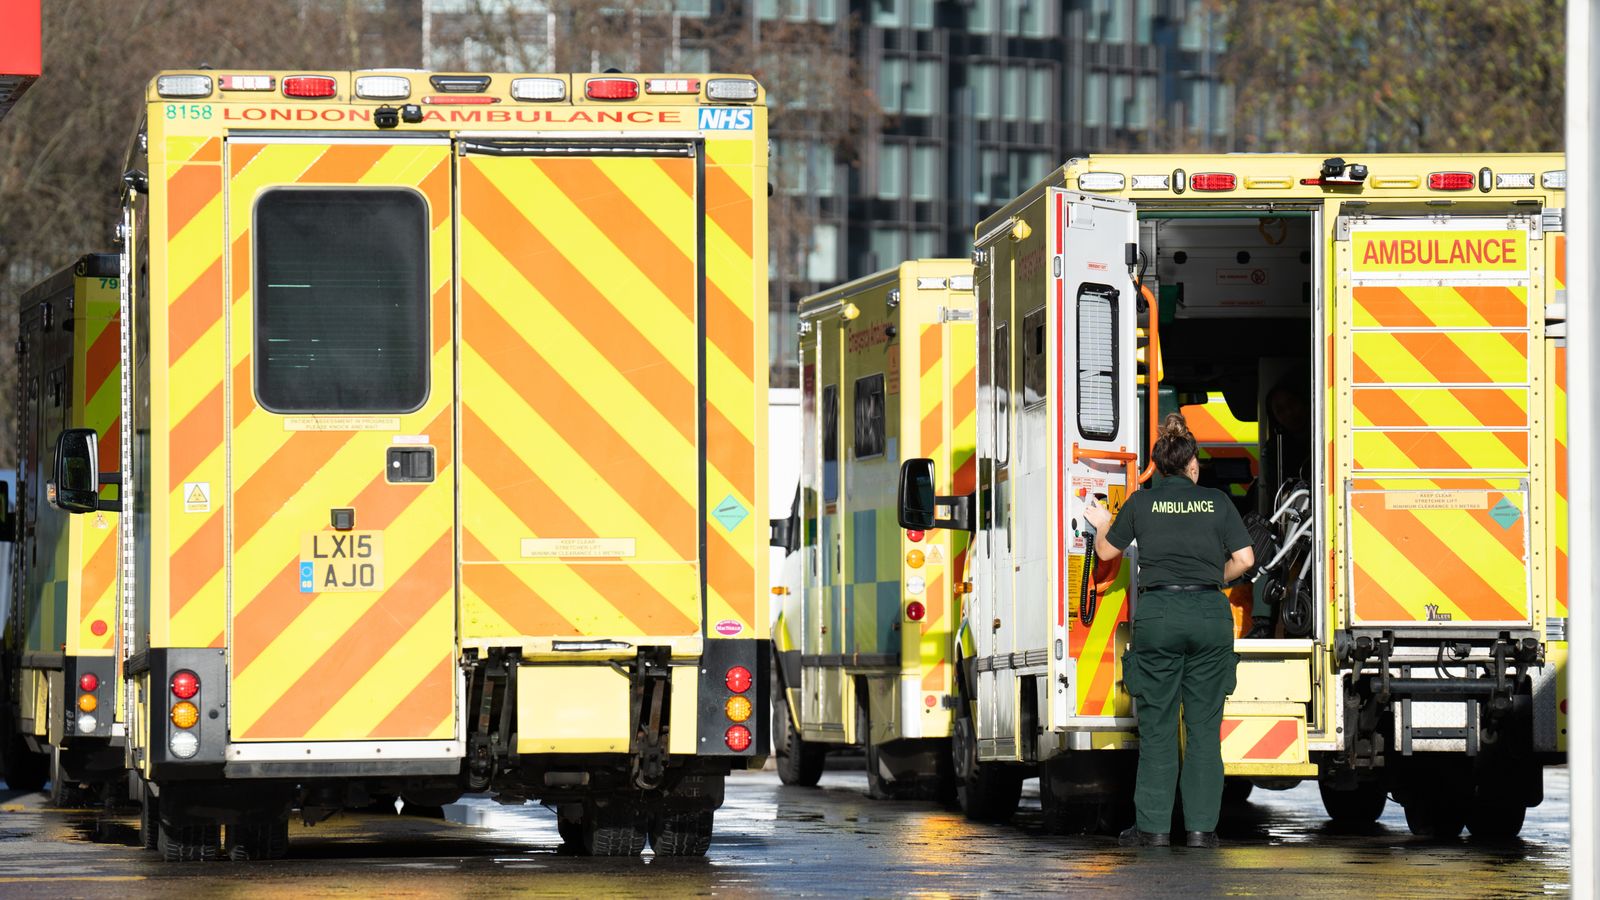 Ambulance workers stage mass walkout - as NHS leaders say they cannot guarantee patient safety